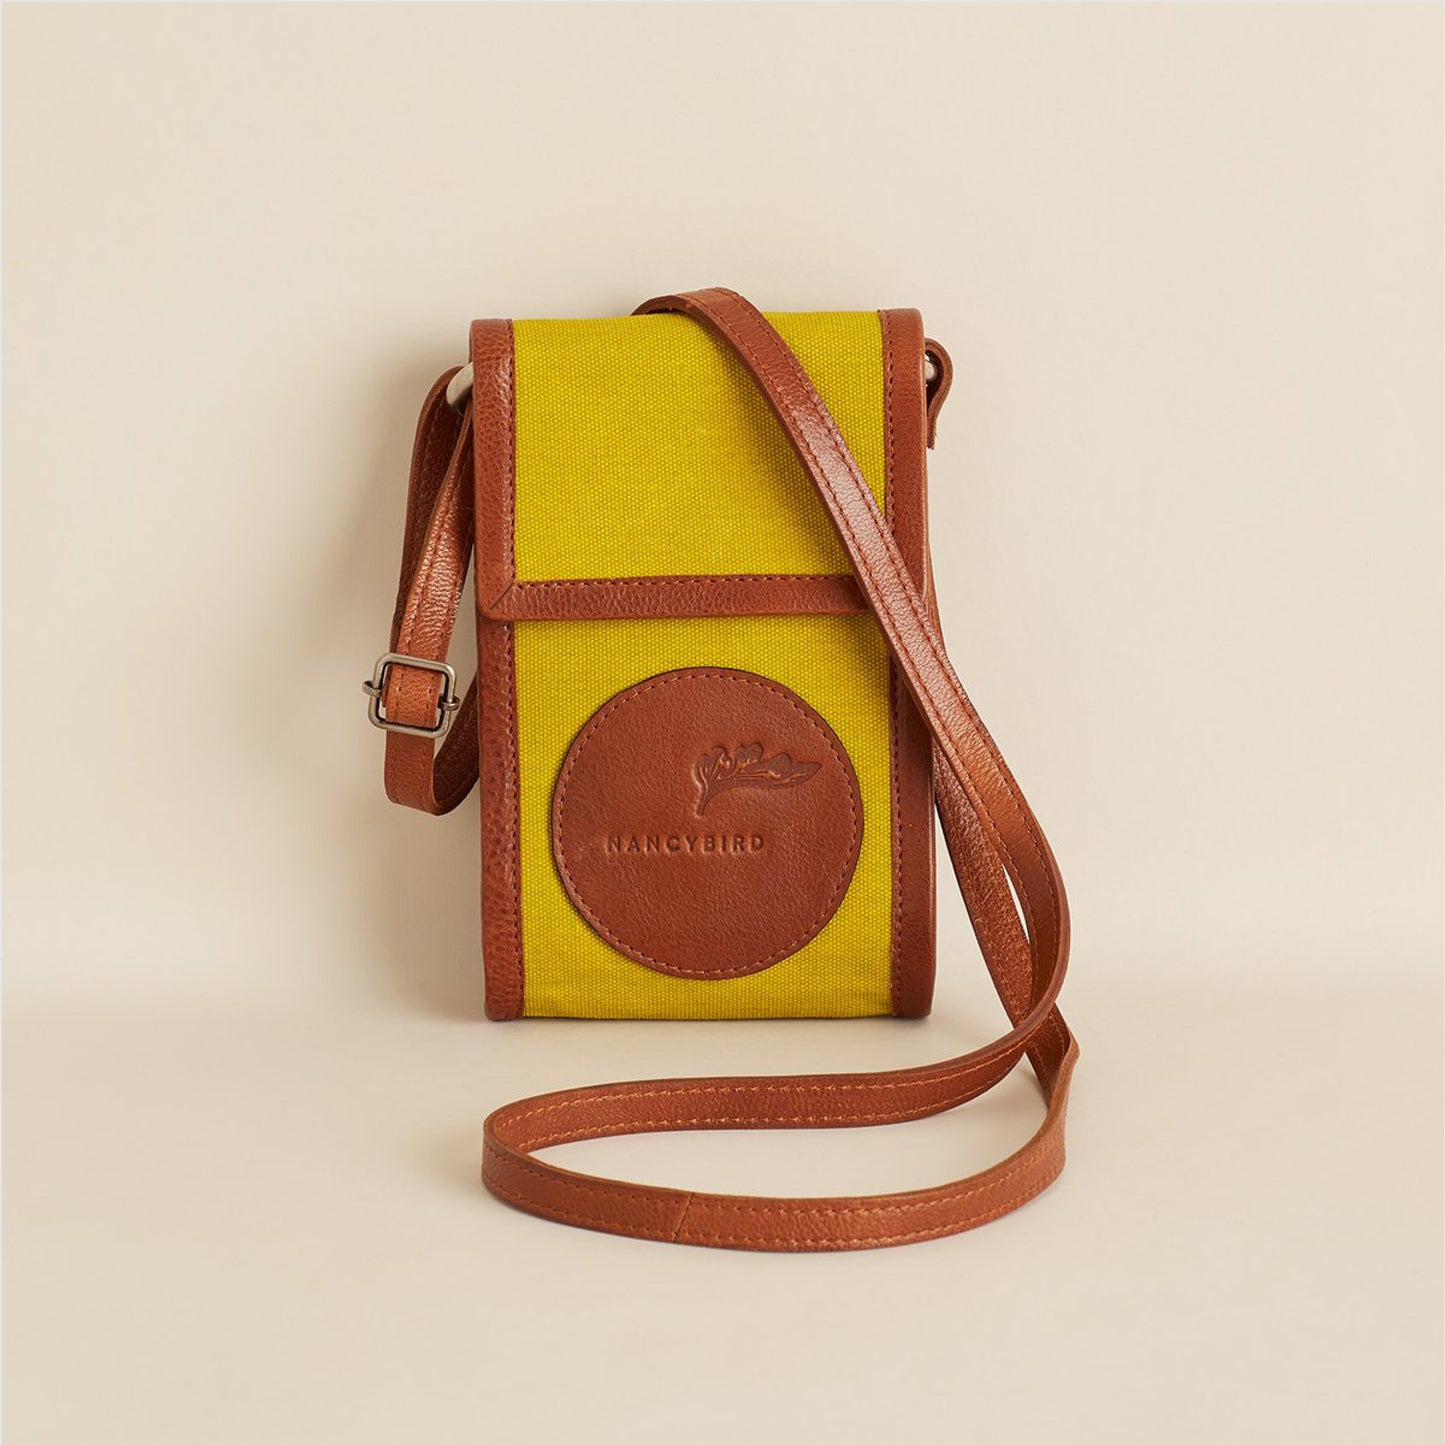 Nancybird Maya Bag in Chartreuse with strap folded over the bag on a neutral background